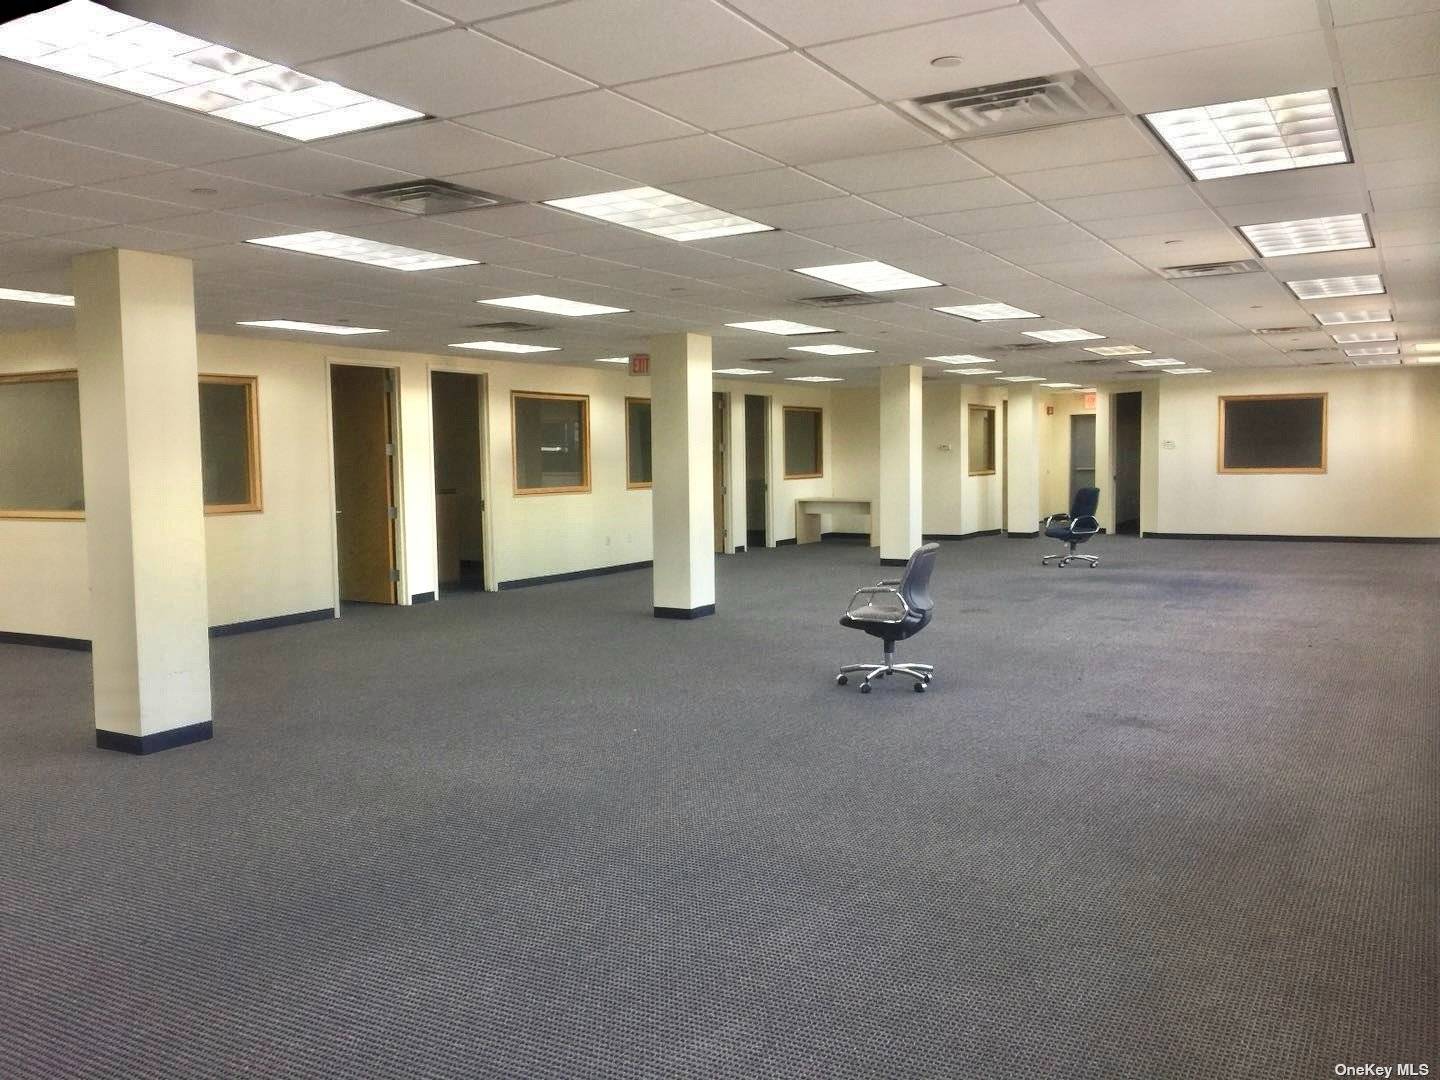 Commercial Office space for lease up to 10, 000 sqft in the heart of Hempstead, Long Island, located amongst many national retail tenants, 8 minutes walk to LIRR, the Hempstead ...